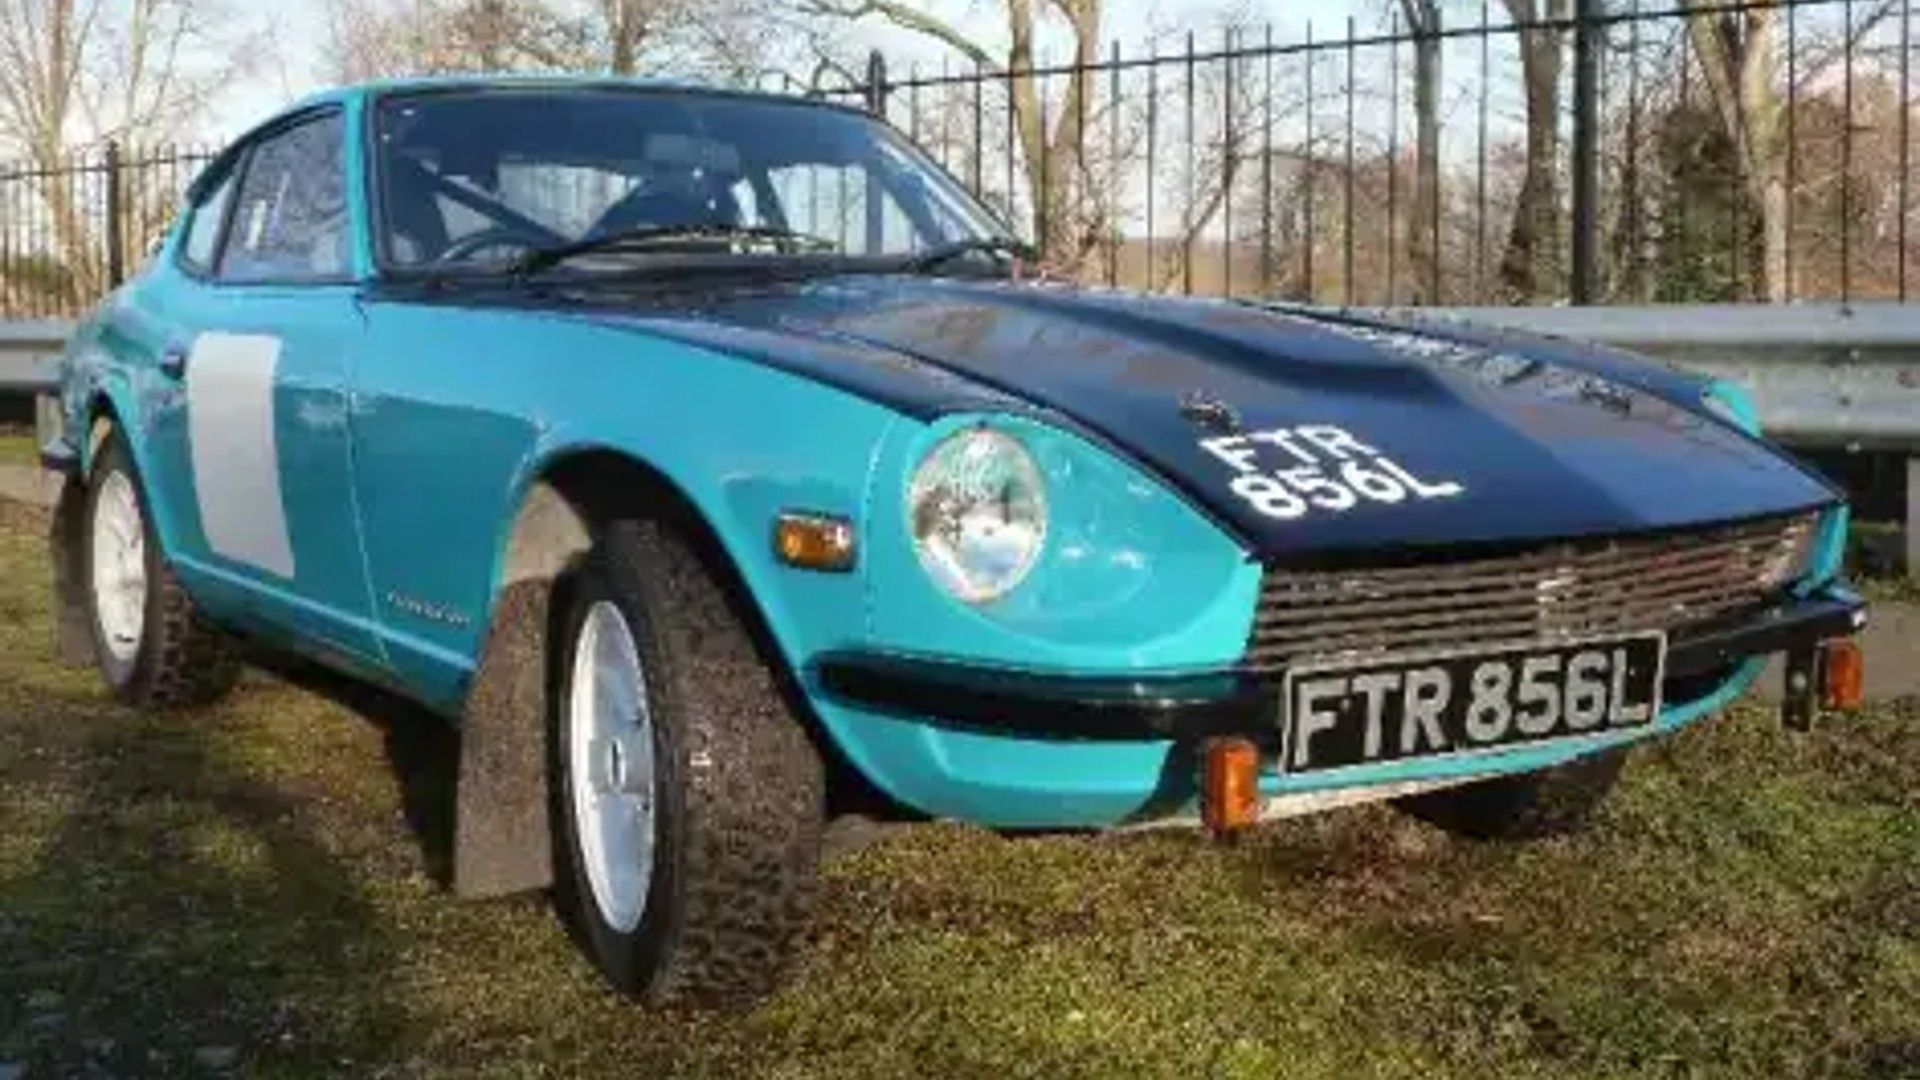 Shot of the front of a blue Datsun 240Z.